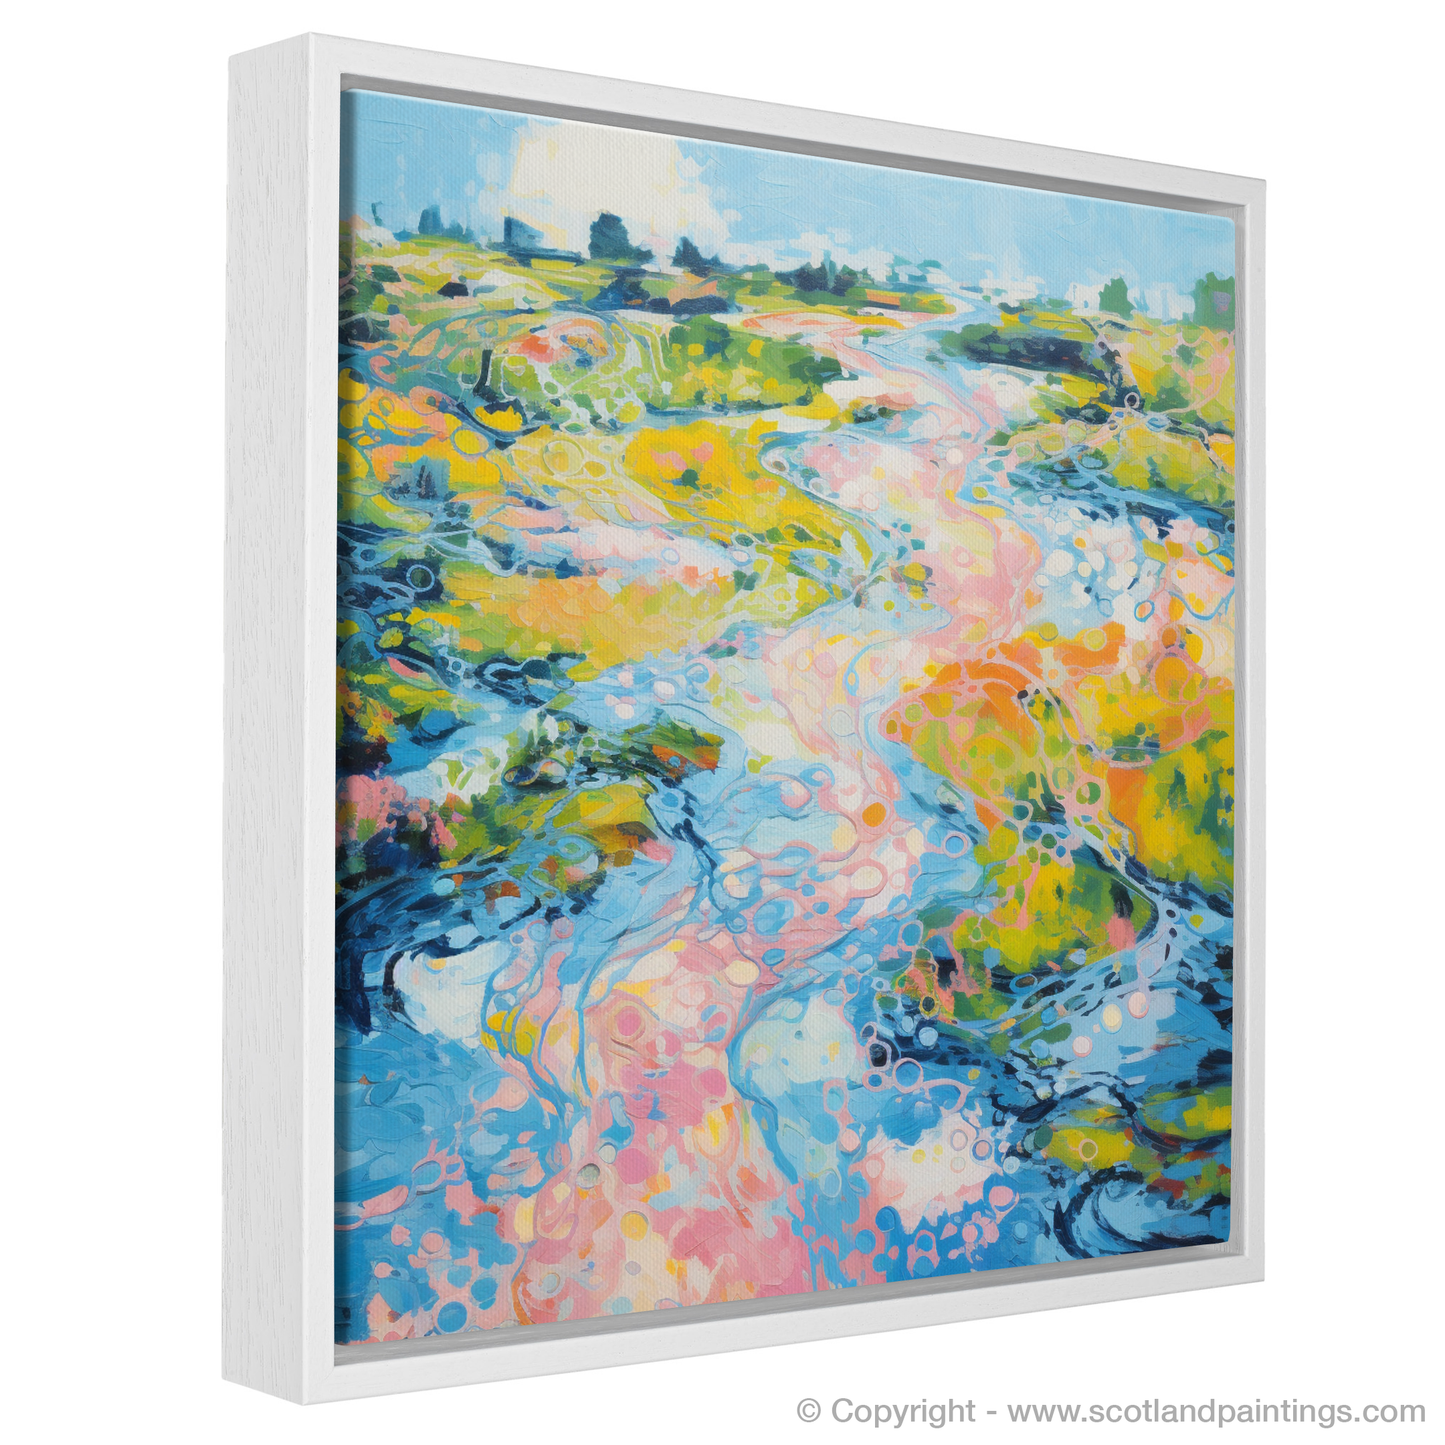 Painting and Art Print of River Dee, Aberdeenshire in summer entitled "Summer Symphony on the River Dee".